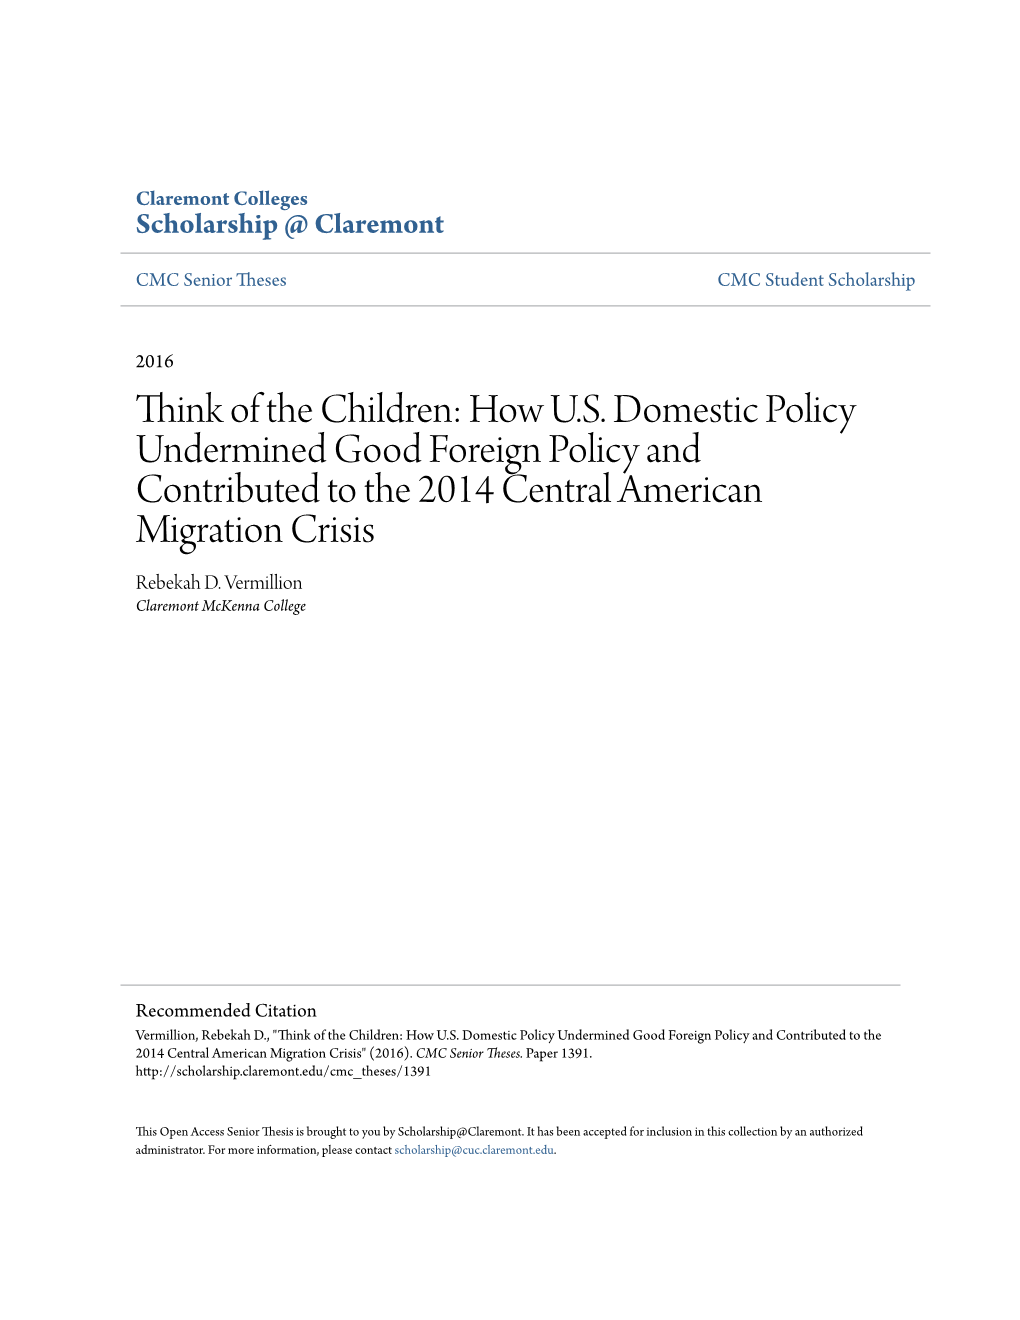 Think of the Children: How U.S. Domestic Policy Undermined Good Foreign